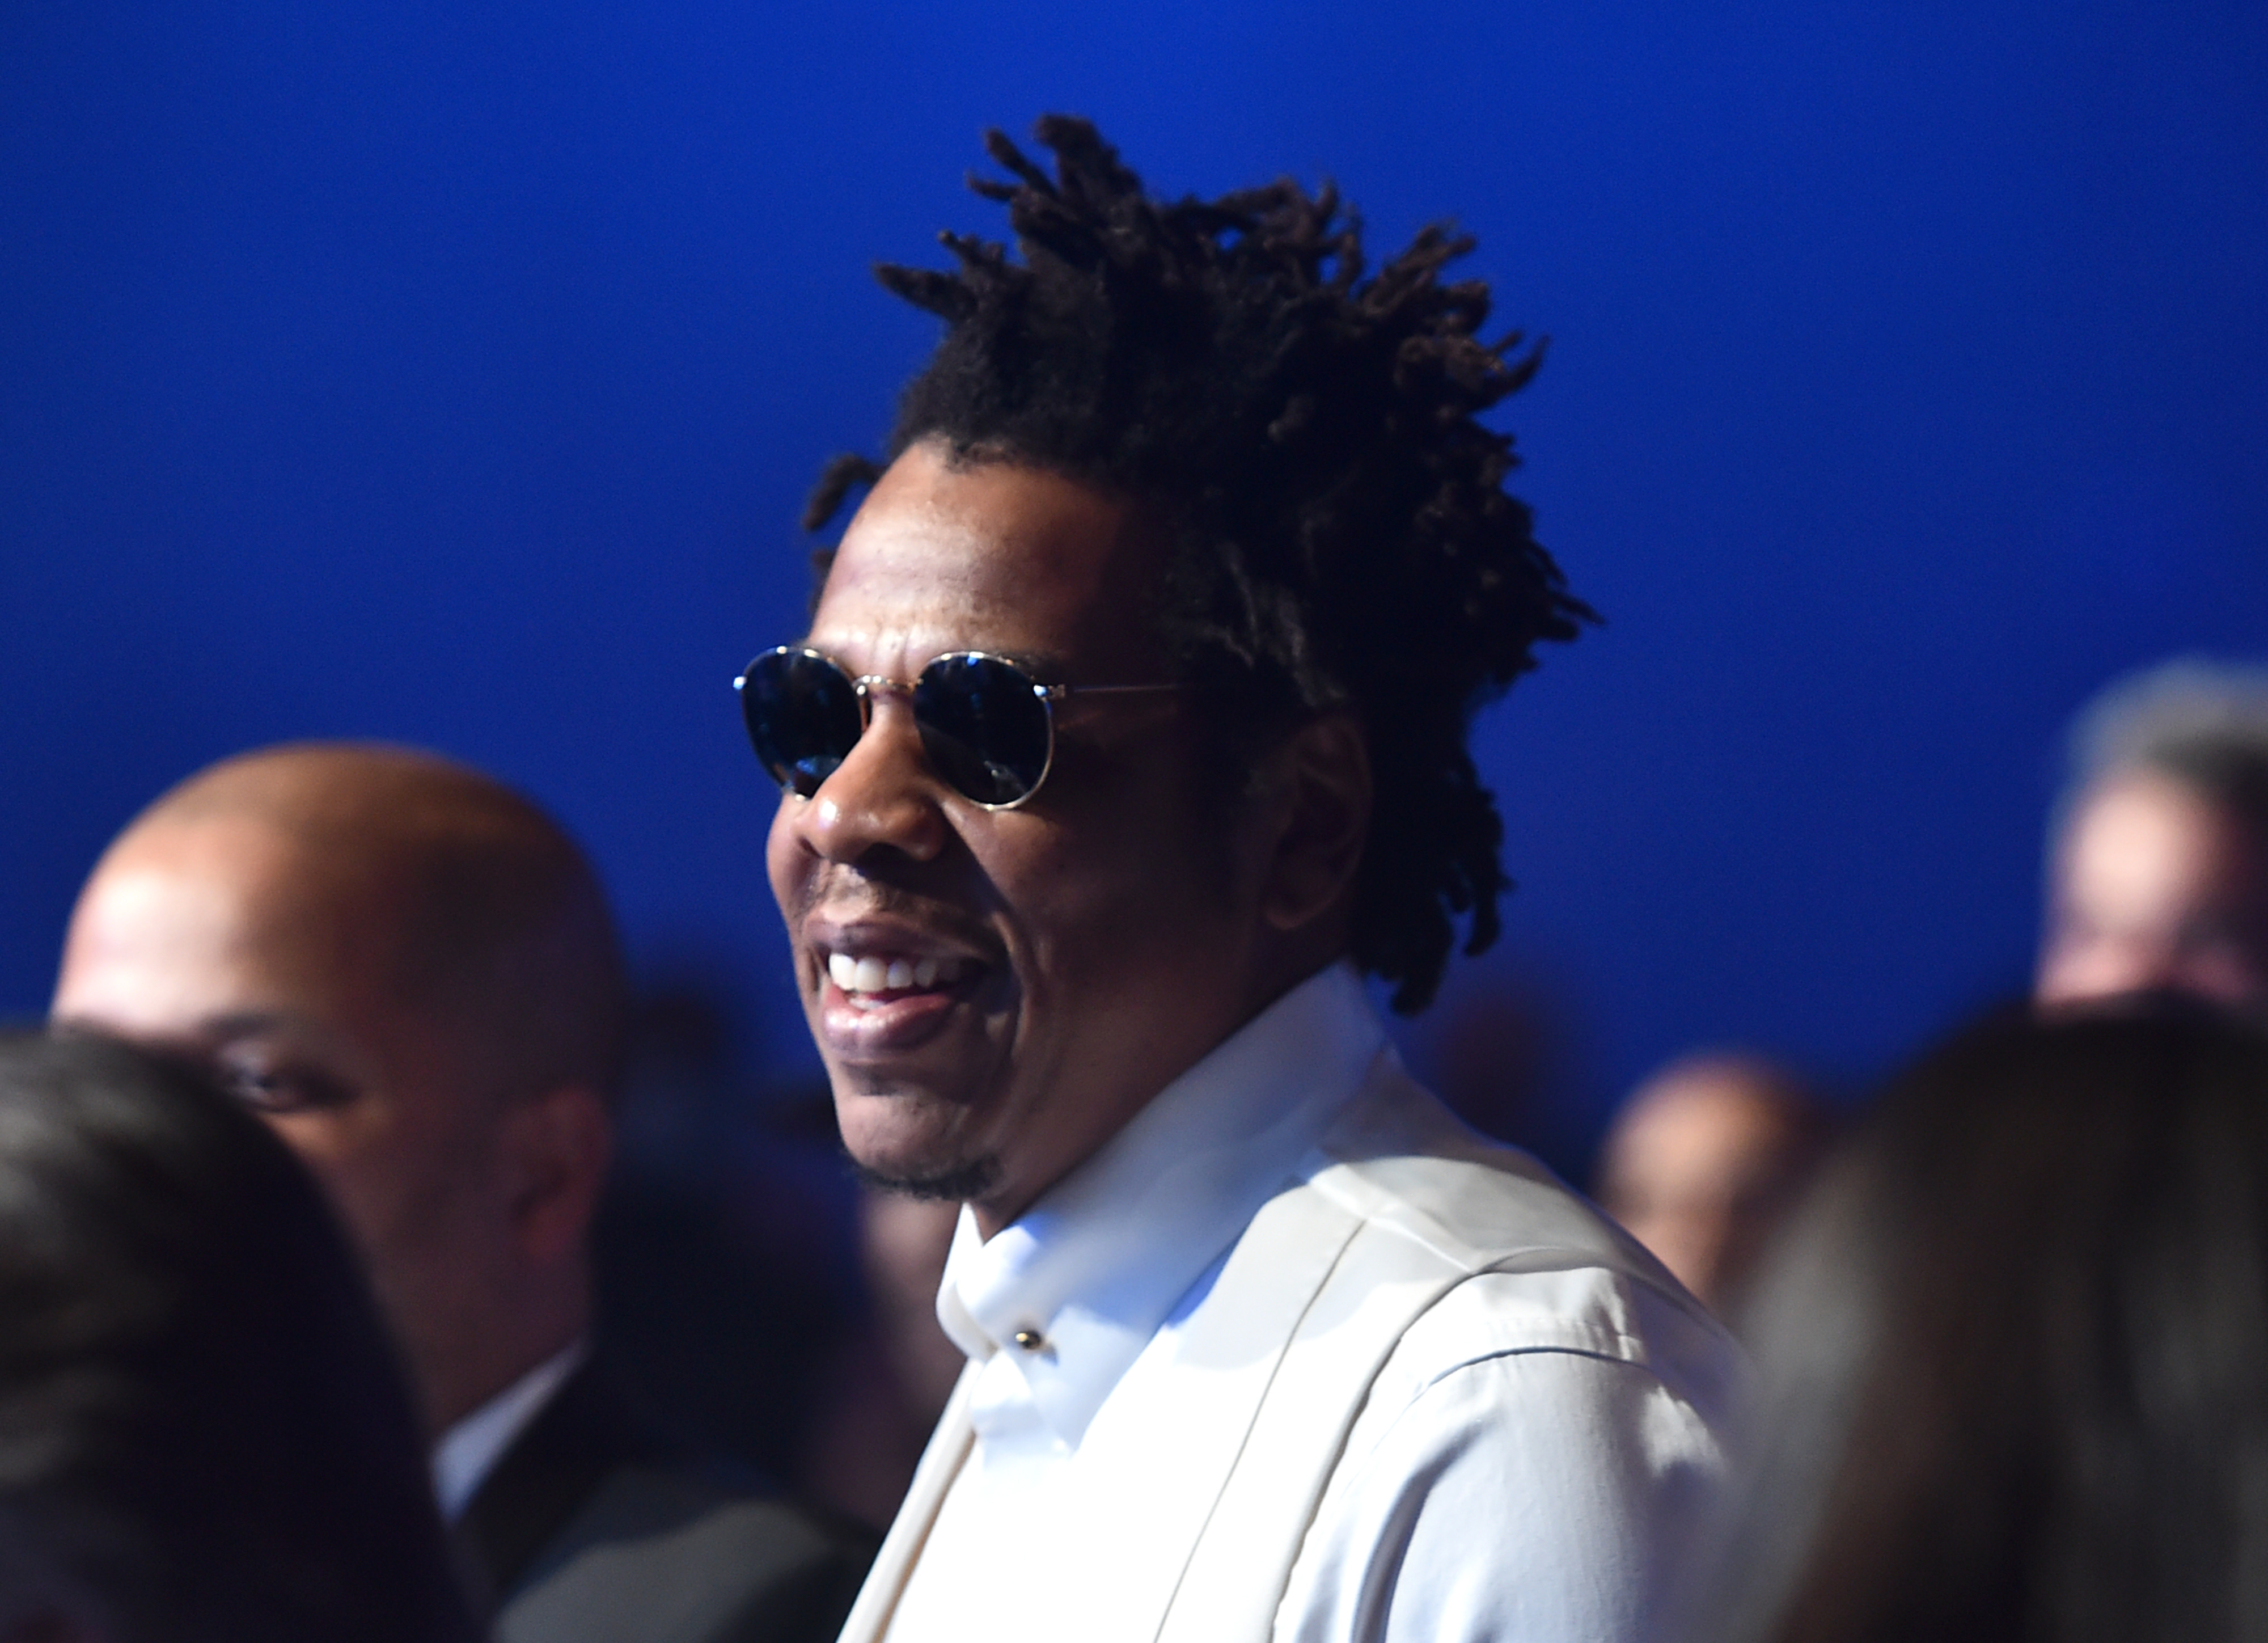 Jay-Z smiling while wearing black sunglasses and a white jacket at the 2020 Grammy Awards pre-show.